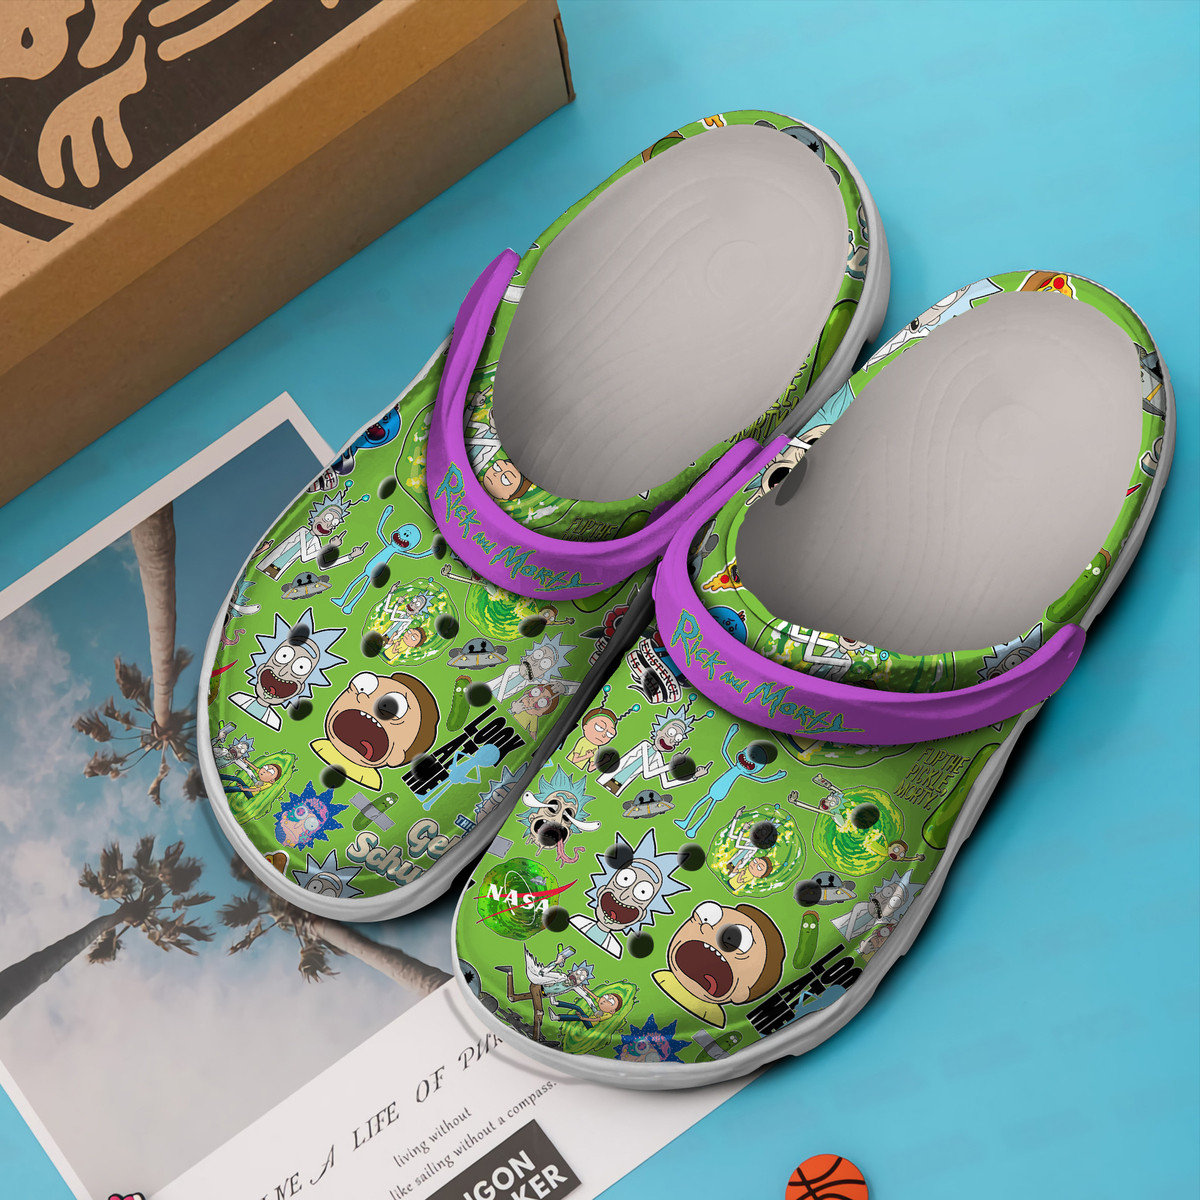 Discover Rick And Rickandmorty TV Series Shoes, Rick And Rickandmorty Summer Shoes, Rick and Rickandmorty Sandals, Rick And Rickandmorty Slipper, TV Series, Rick and Rickandmorty Gifts